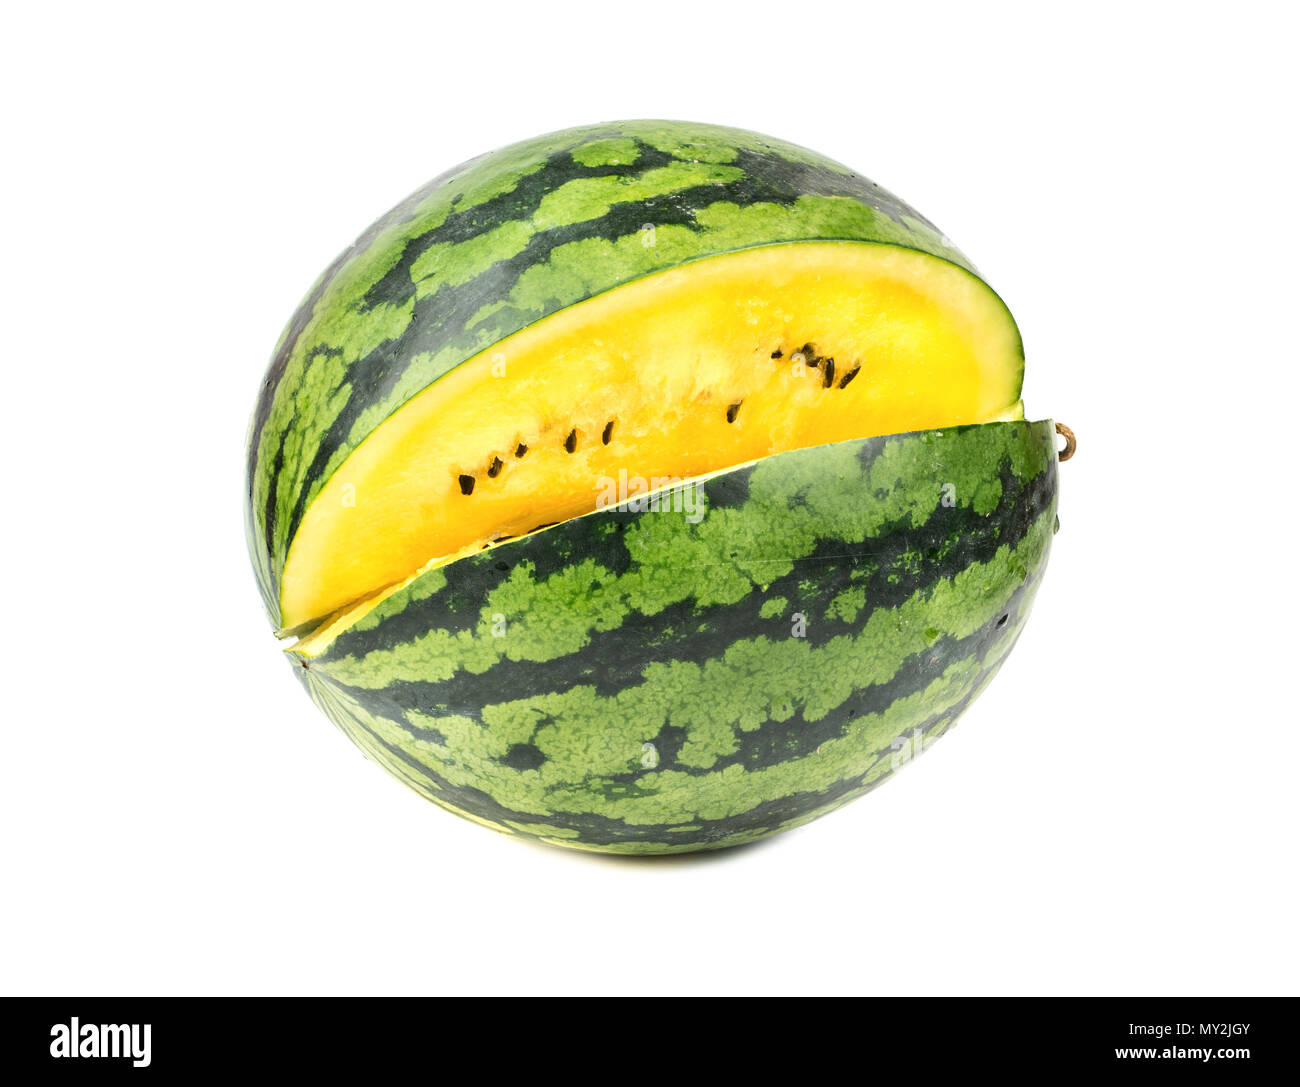 Ripe yellow melon with the cut out piece isolated on white background Stock Photo